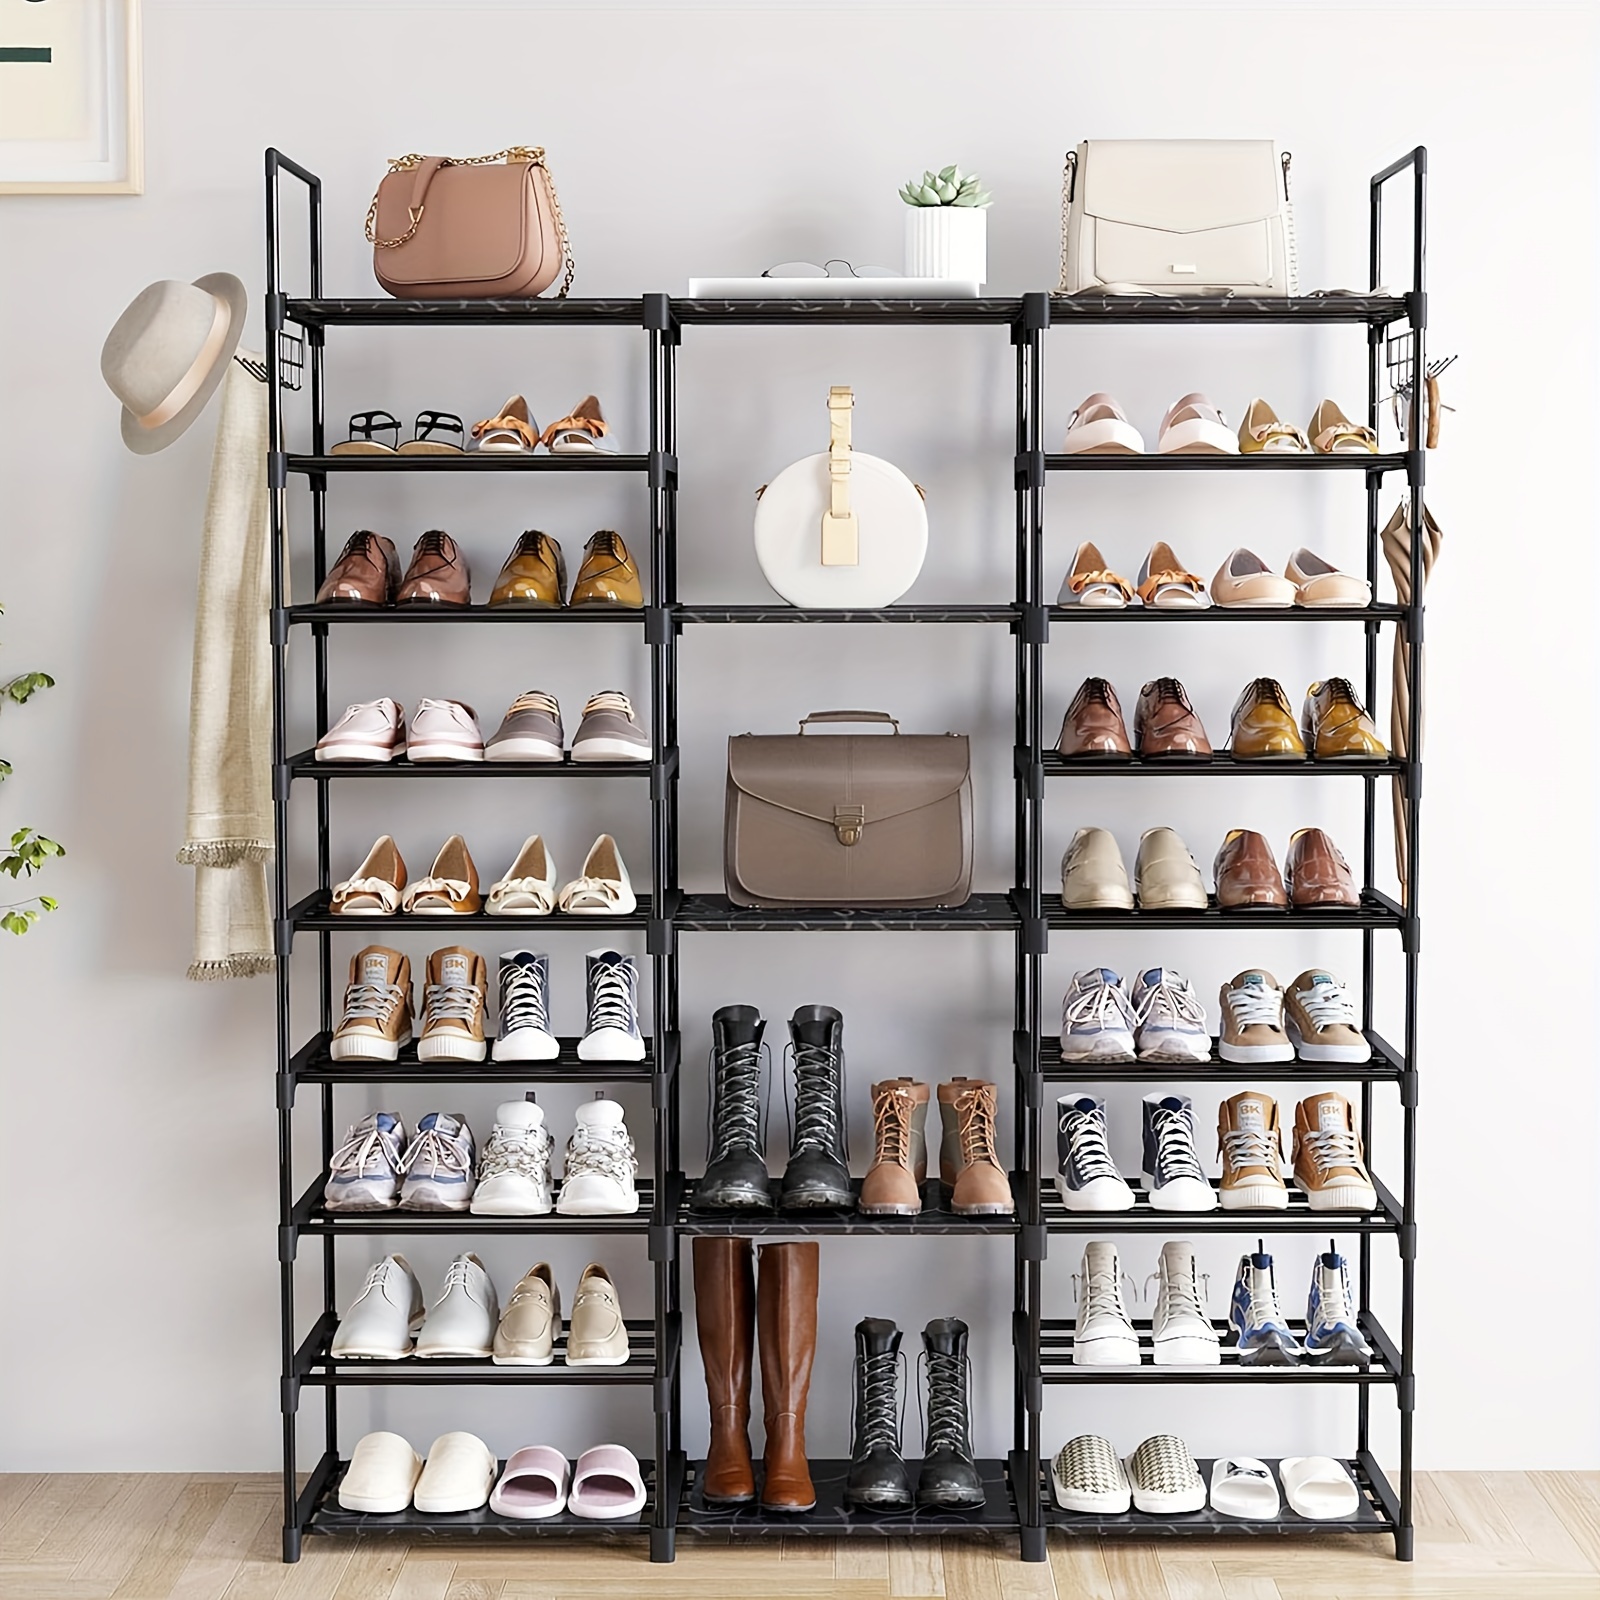 

1 Pc 9-tier Black Shoe Rack For 50-55 Pairs Of Shoes, Measuring 51" L X 10.6" W X 61.2" H, Suitable For Entryway, Wardrobe, Cupboard, Wardrobe Or Living Room